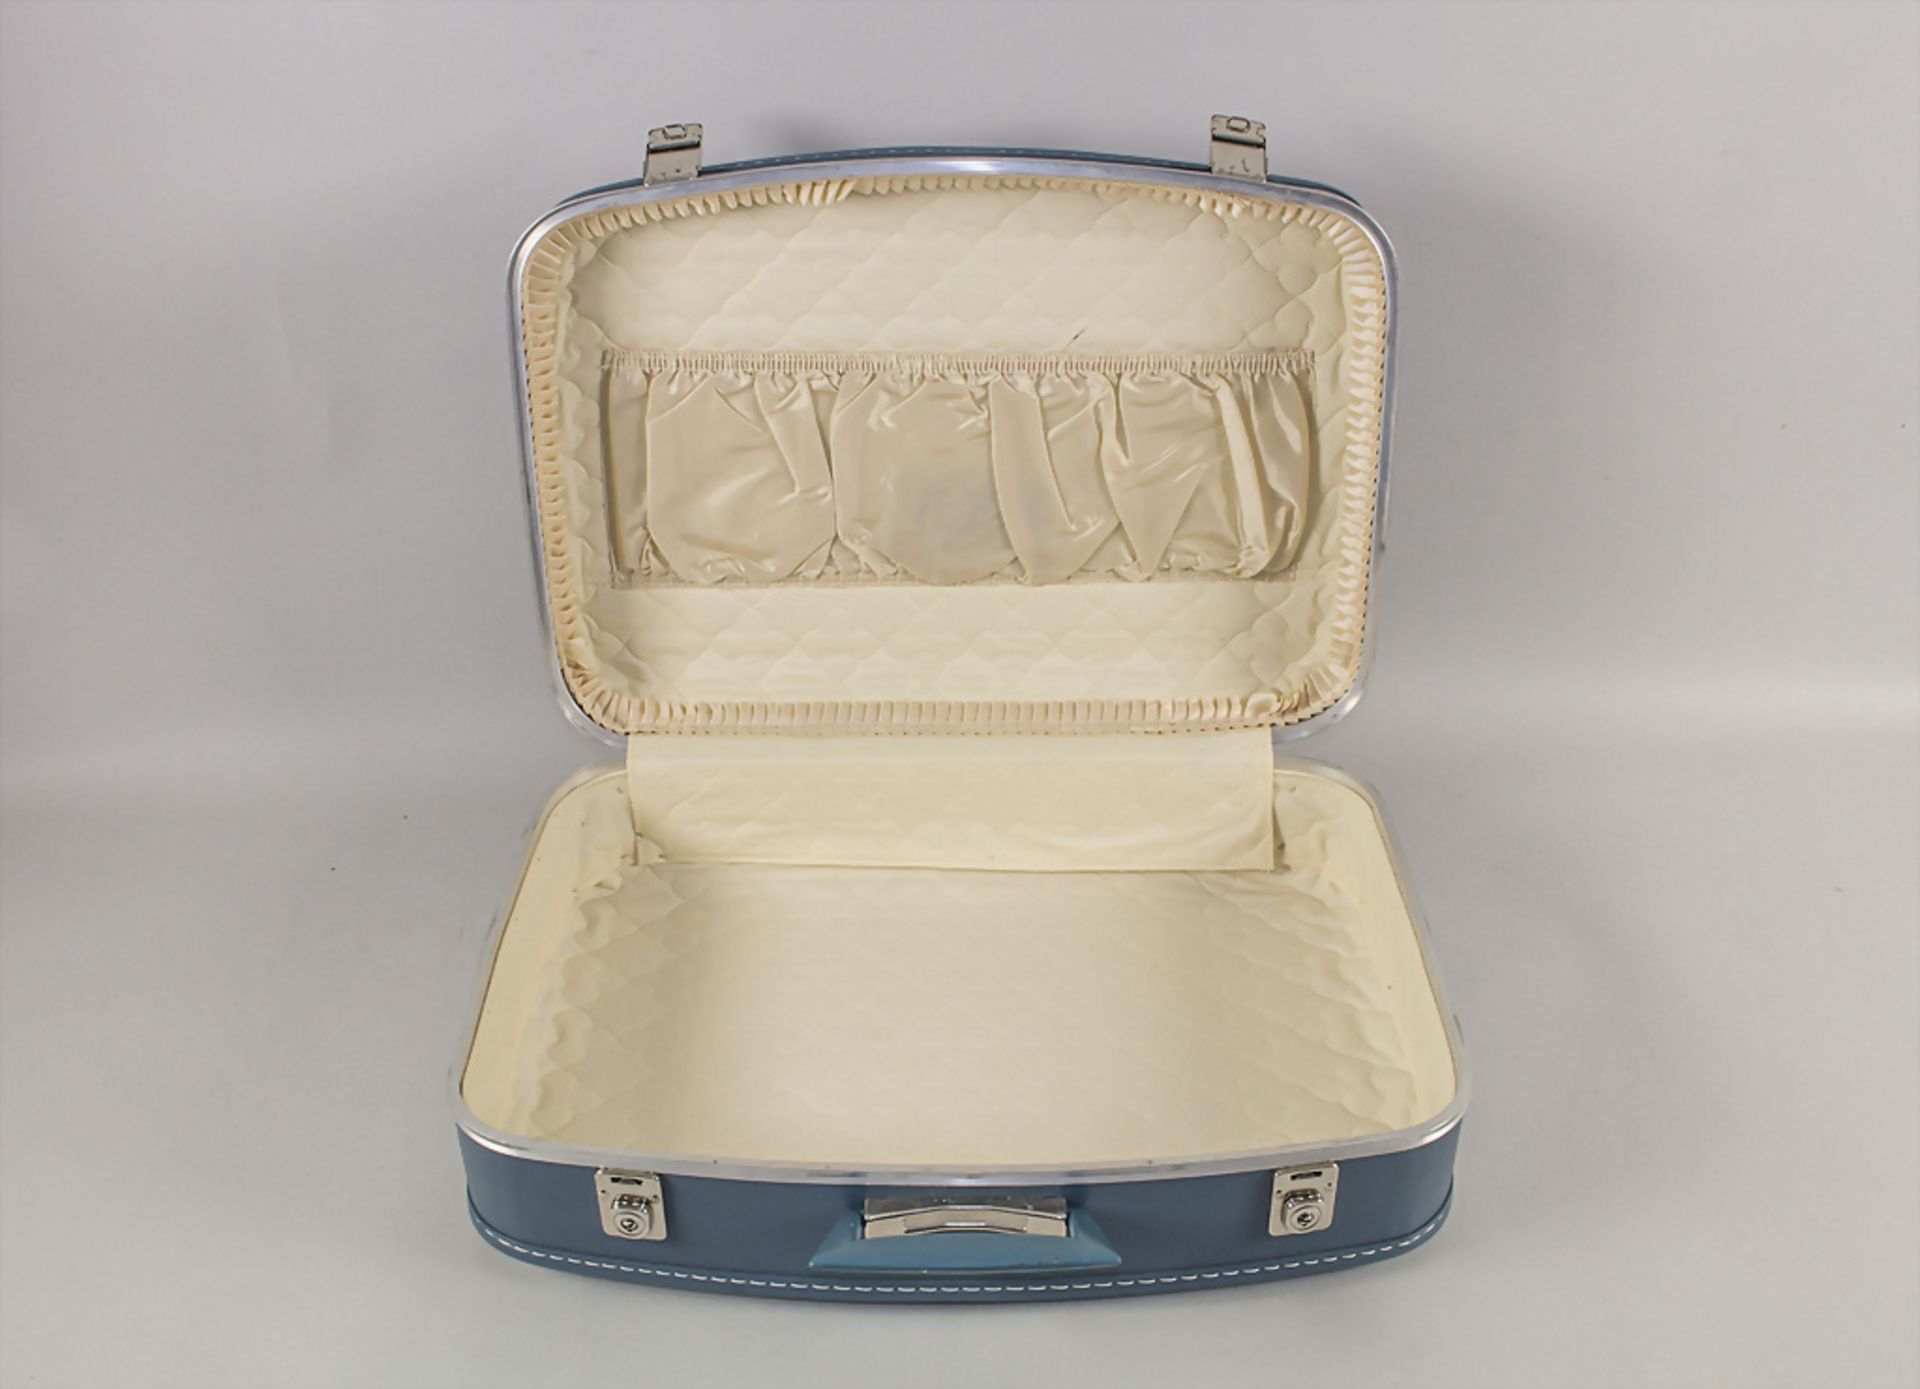 Kofferset: 4 Koffer, 1 Tasche, 1 Kulturbeutel / A suitcase set: 4 suitcases, 1 small bag, 1 ... - Image 8 of 11